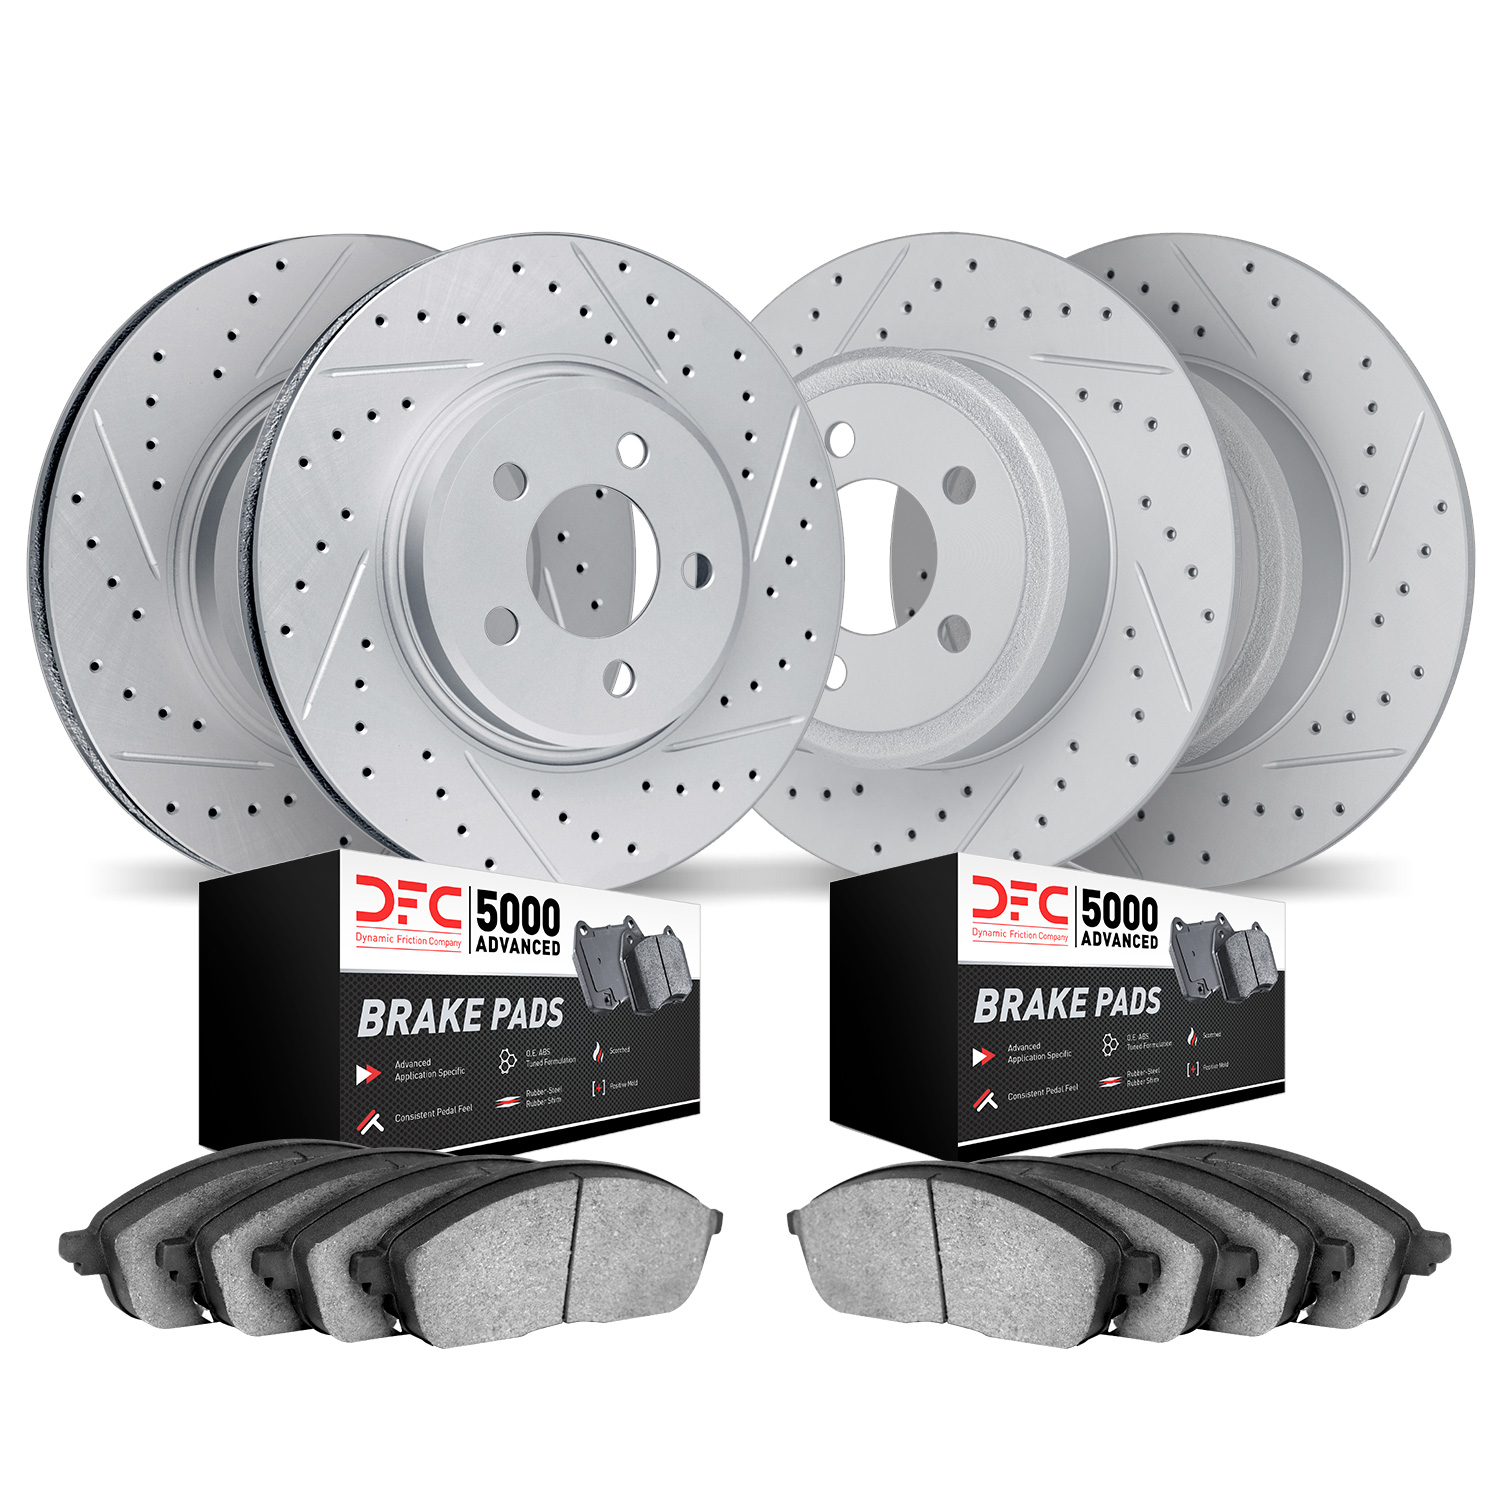 2504-67057 Geoperformance Drilled/Slotted Rotors w/5000 Advanced Brake Pads Kit, 2002-2006 Infiniti/Nissan, Position: Front and